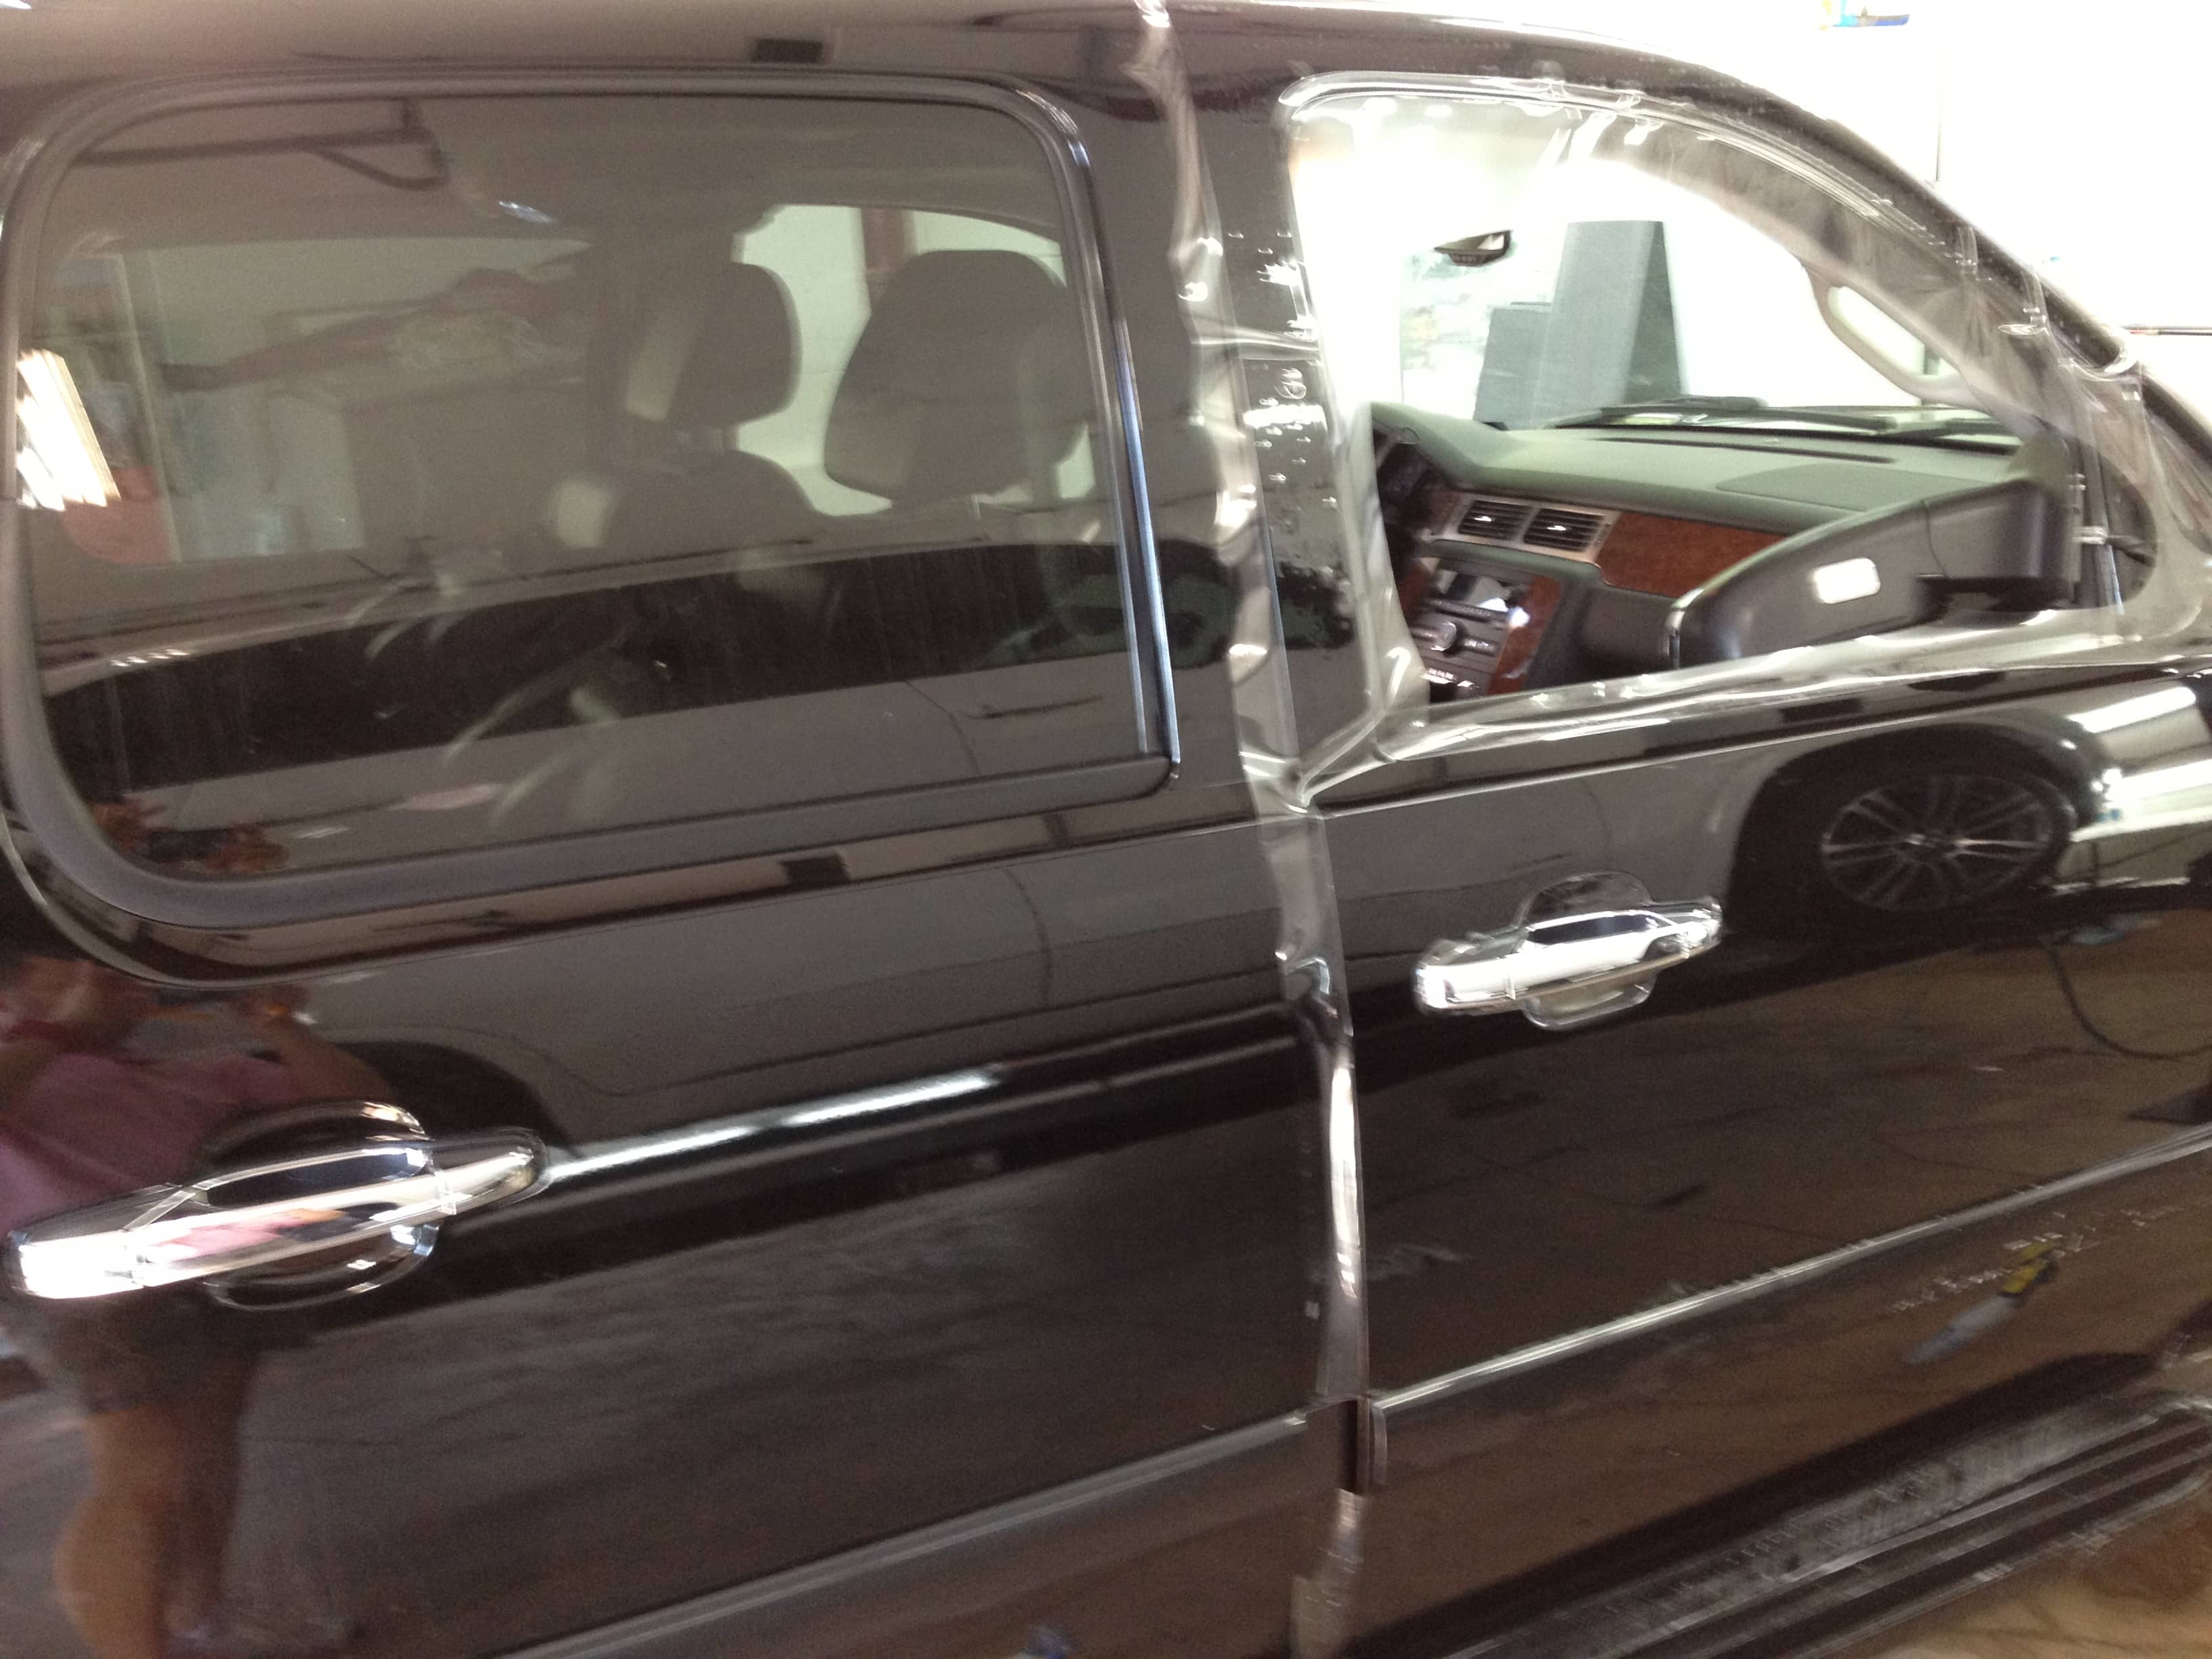 2009 Chevy Suburban full vehicle clear paint rock chip protection film St. Louis XPel